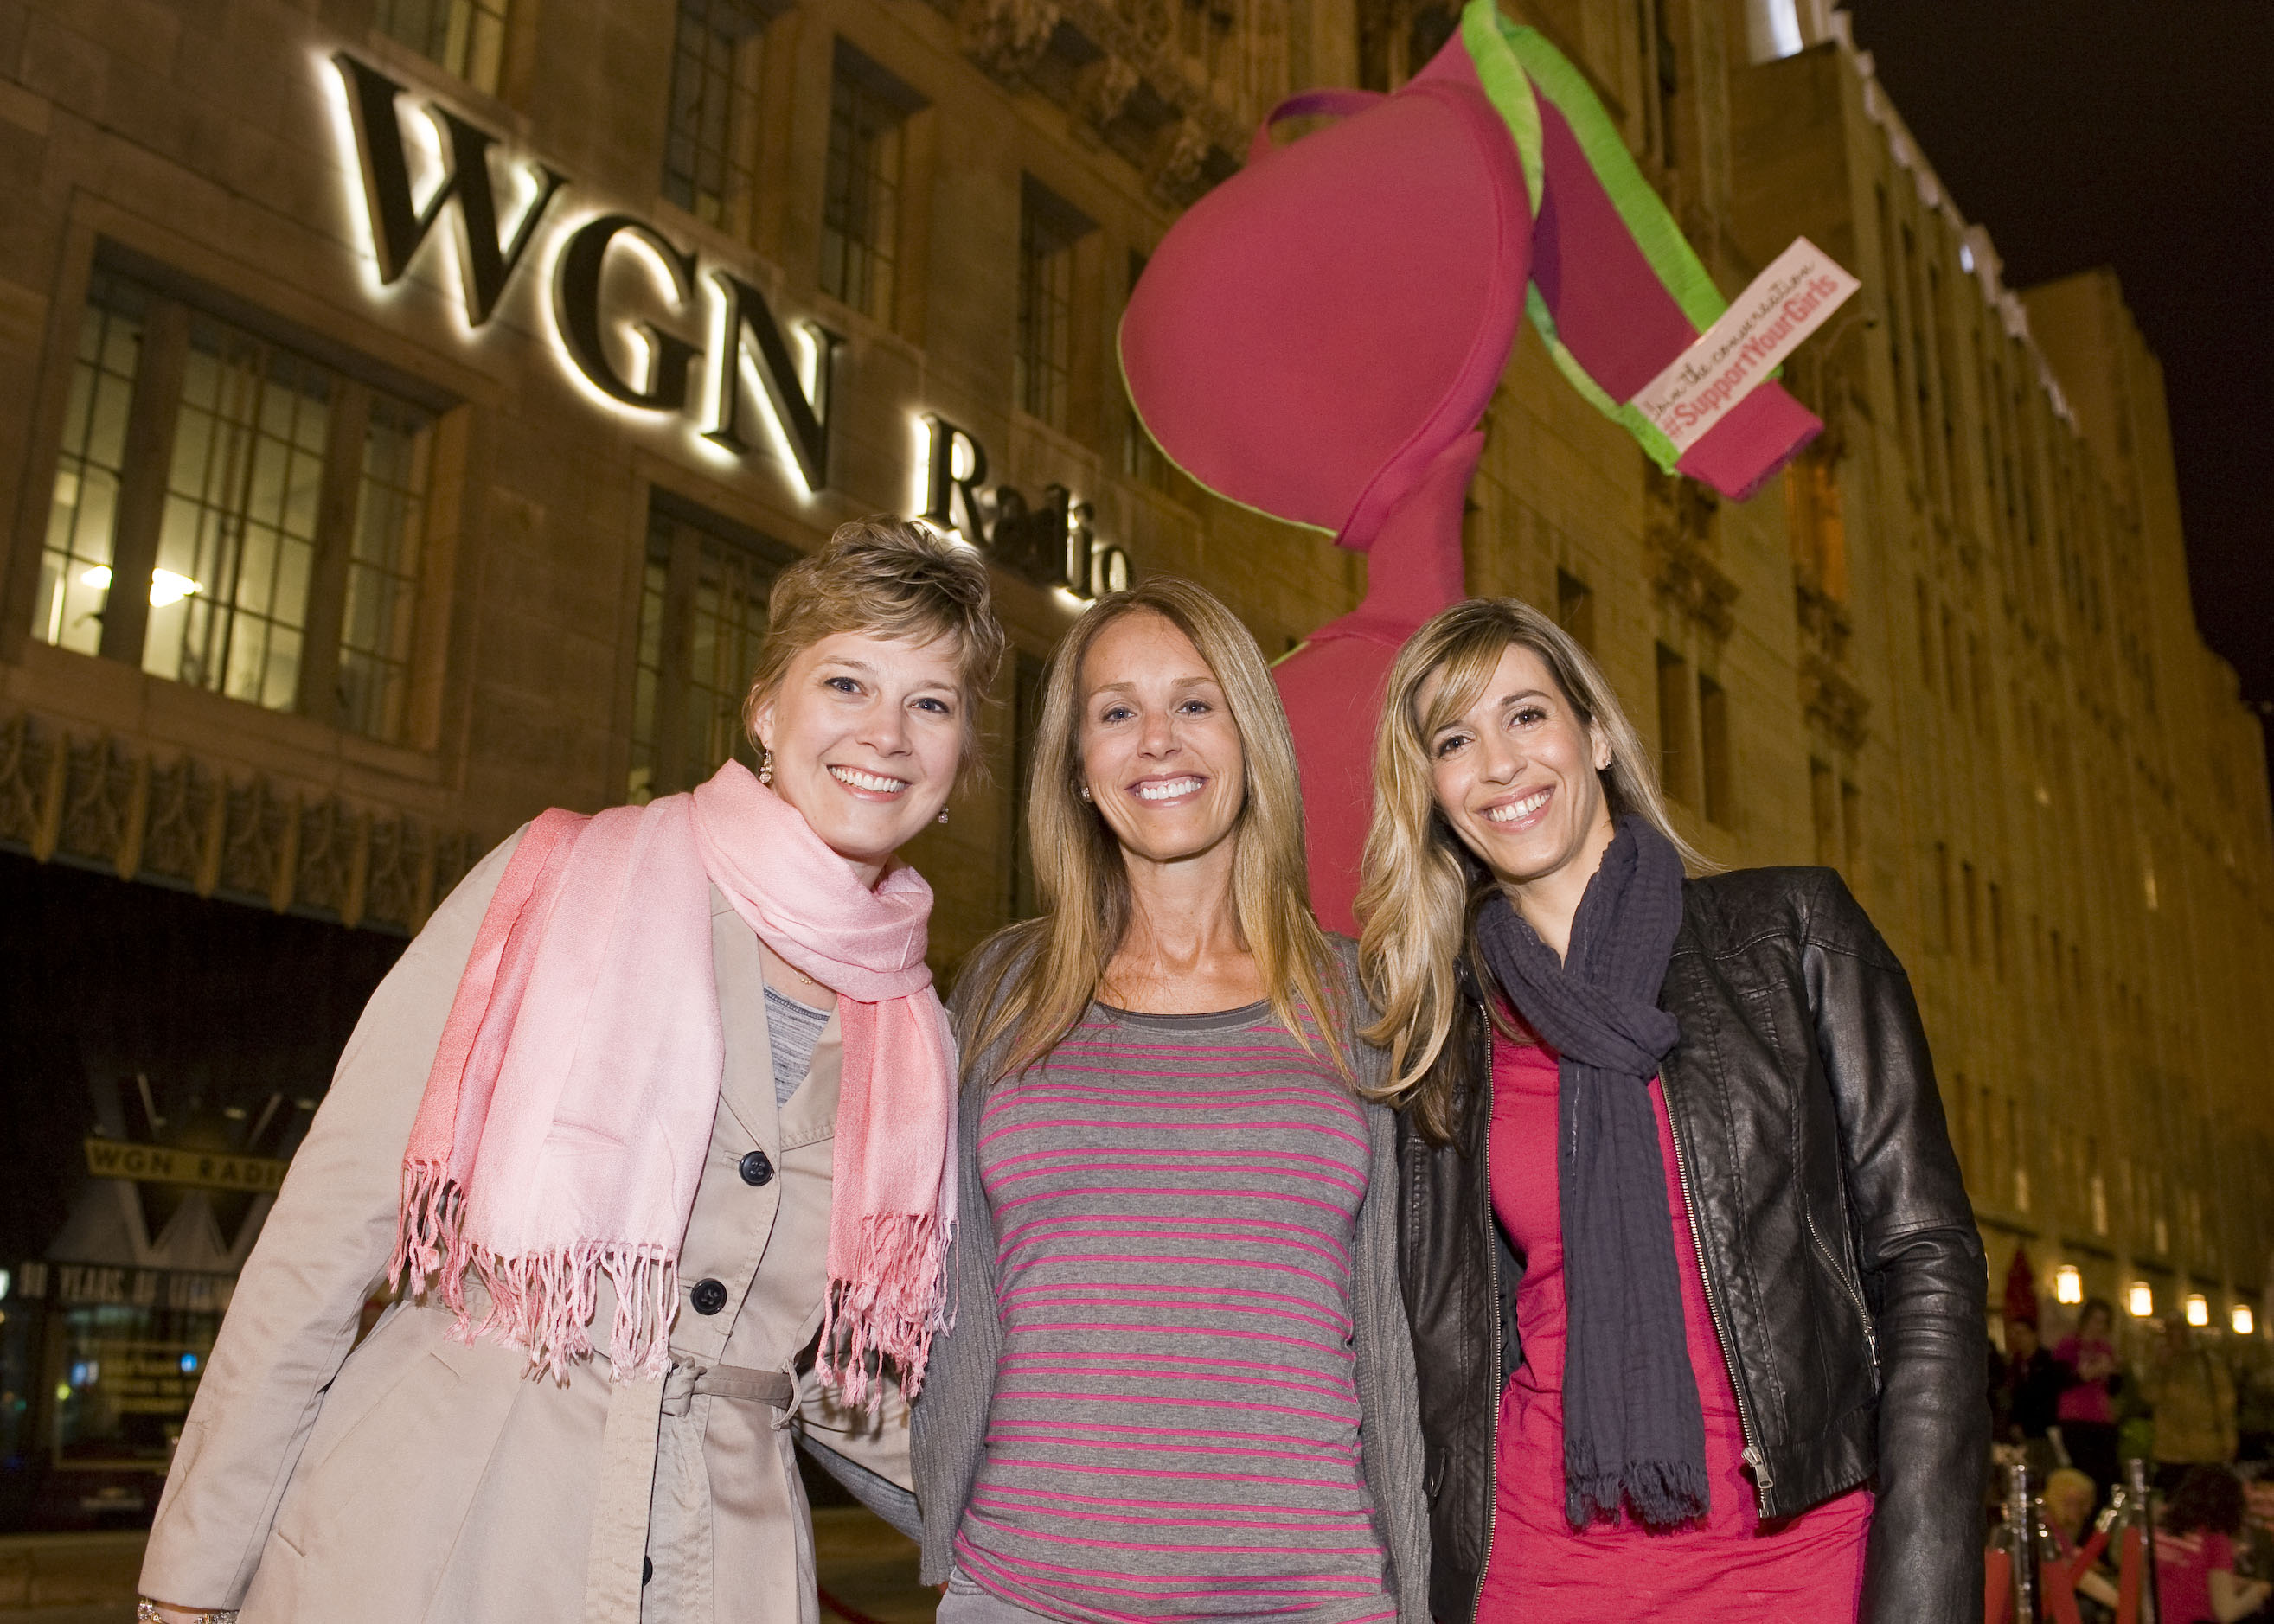 Three of our beautiful, inspiring breast cancer survivors.